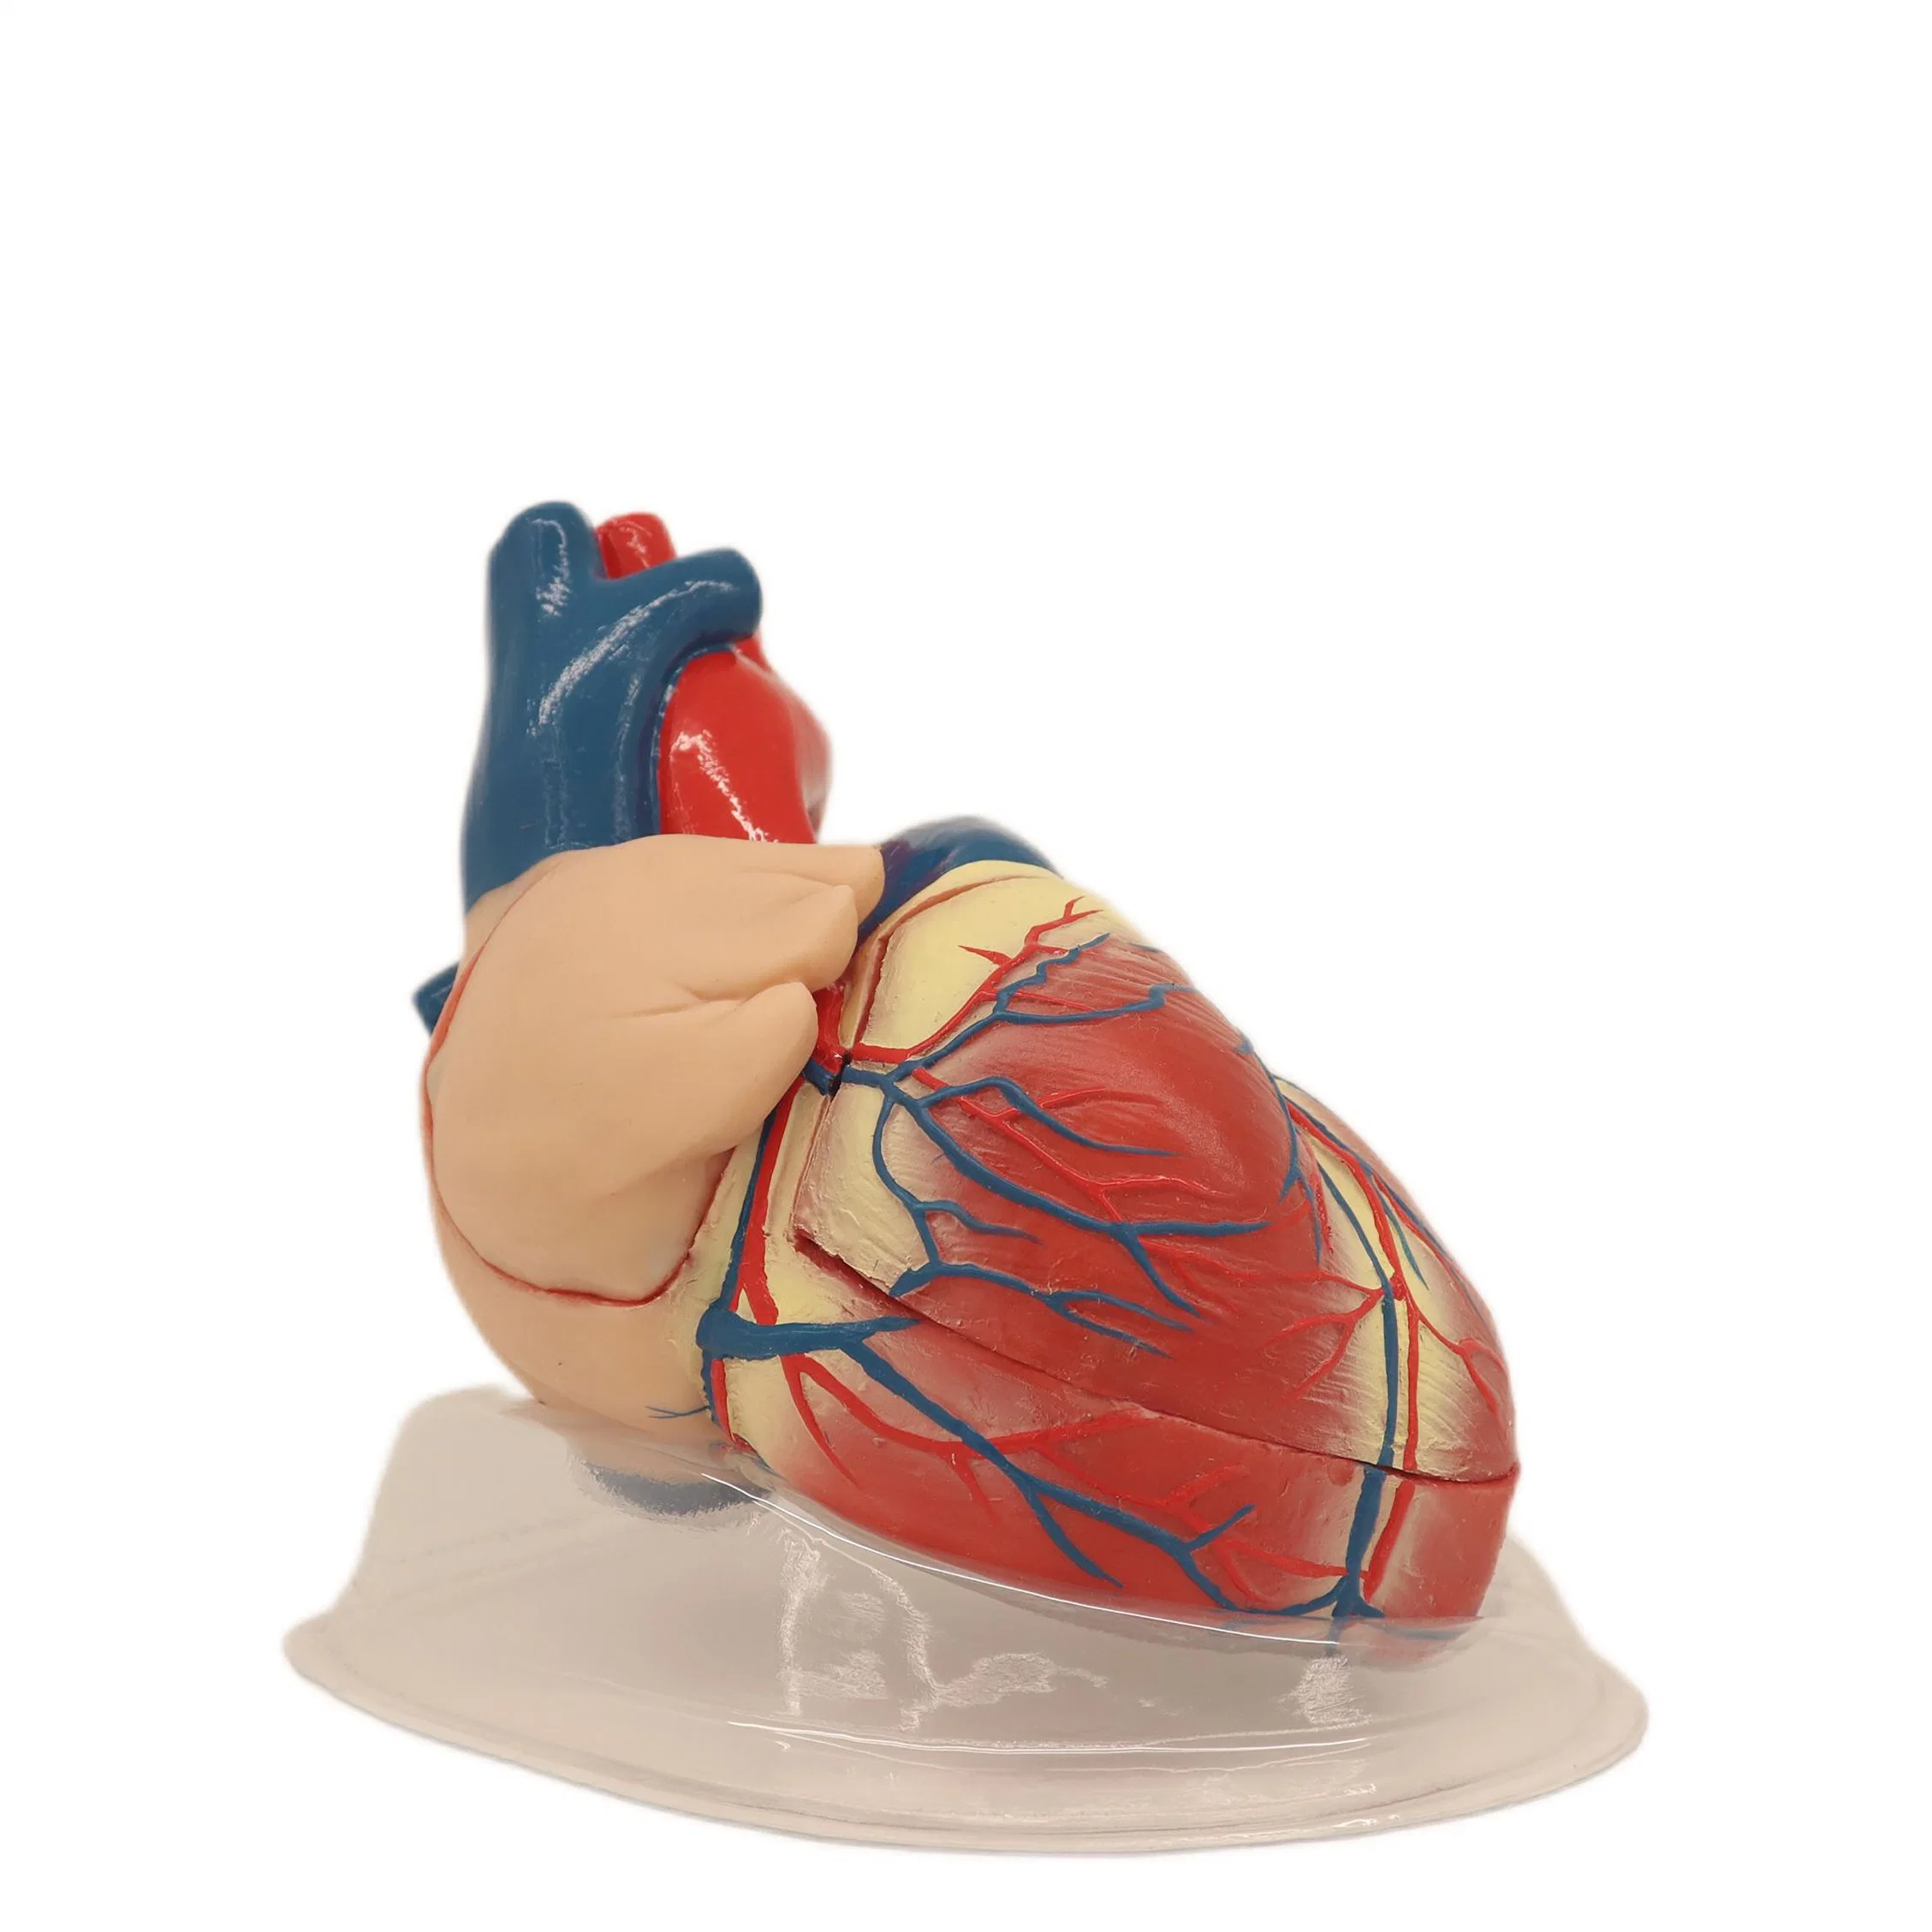 Strong Support PVC Humam Anatomical Model Model of Heart Dissection